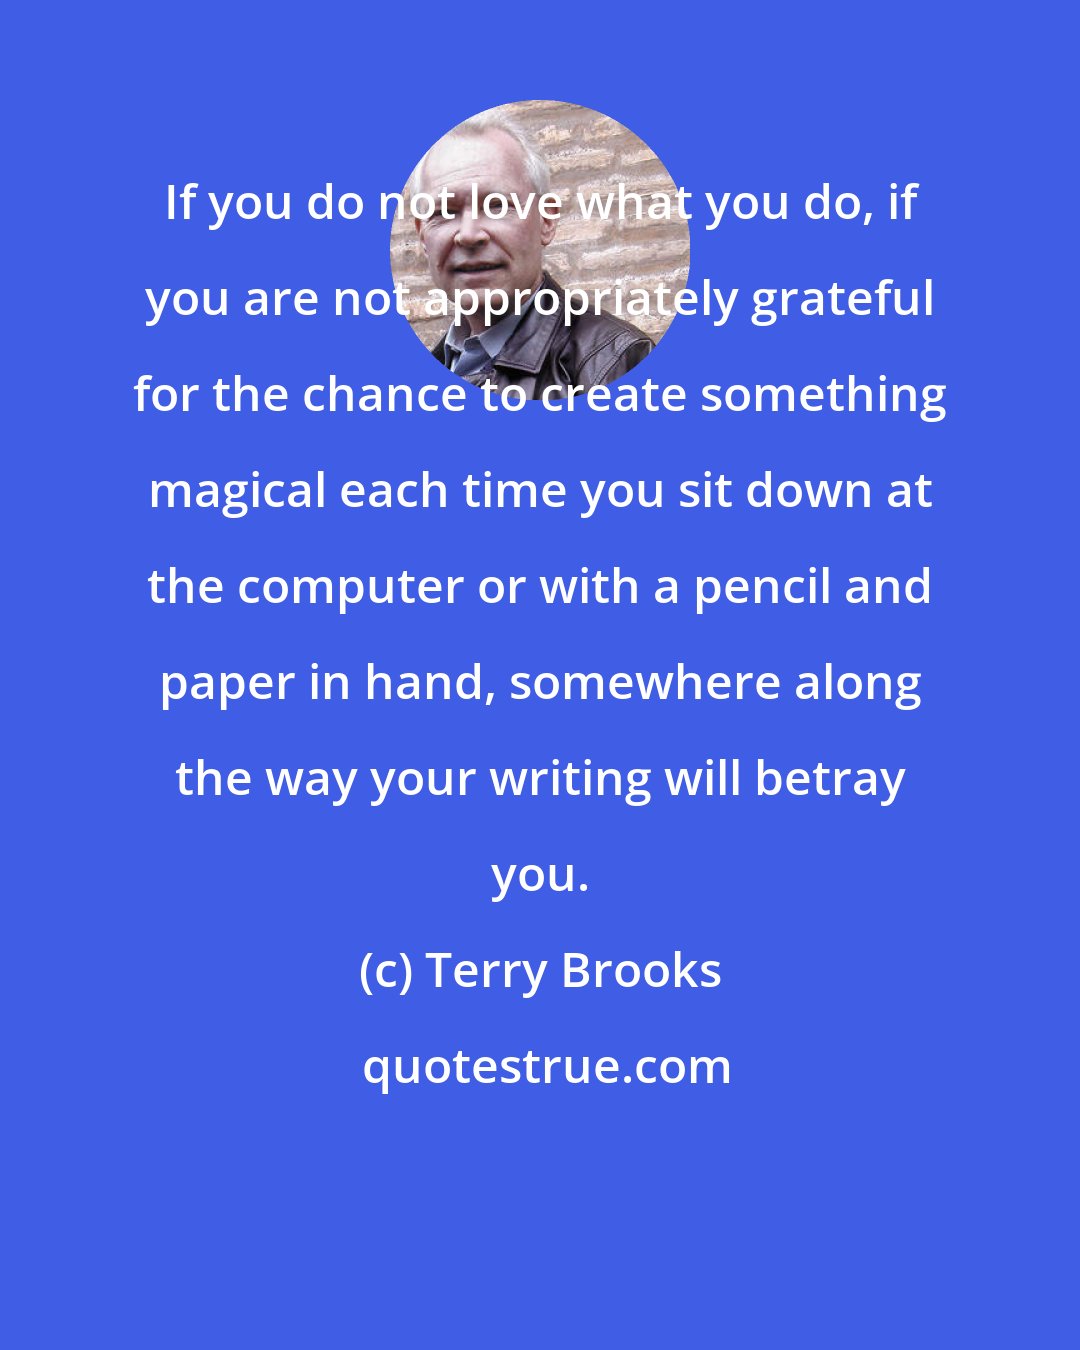 Terry Brooks: If you do not love what you do, if you are not appropriately grateful for the chance to create something magical each time you sit down at the computer or with a pencil and paper in hand, somewhere along the way your writing will betray you.